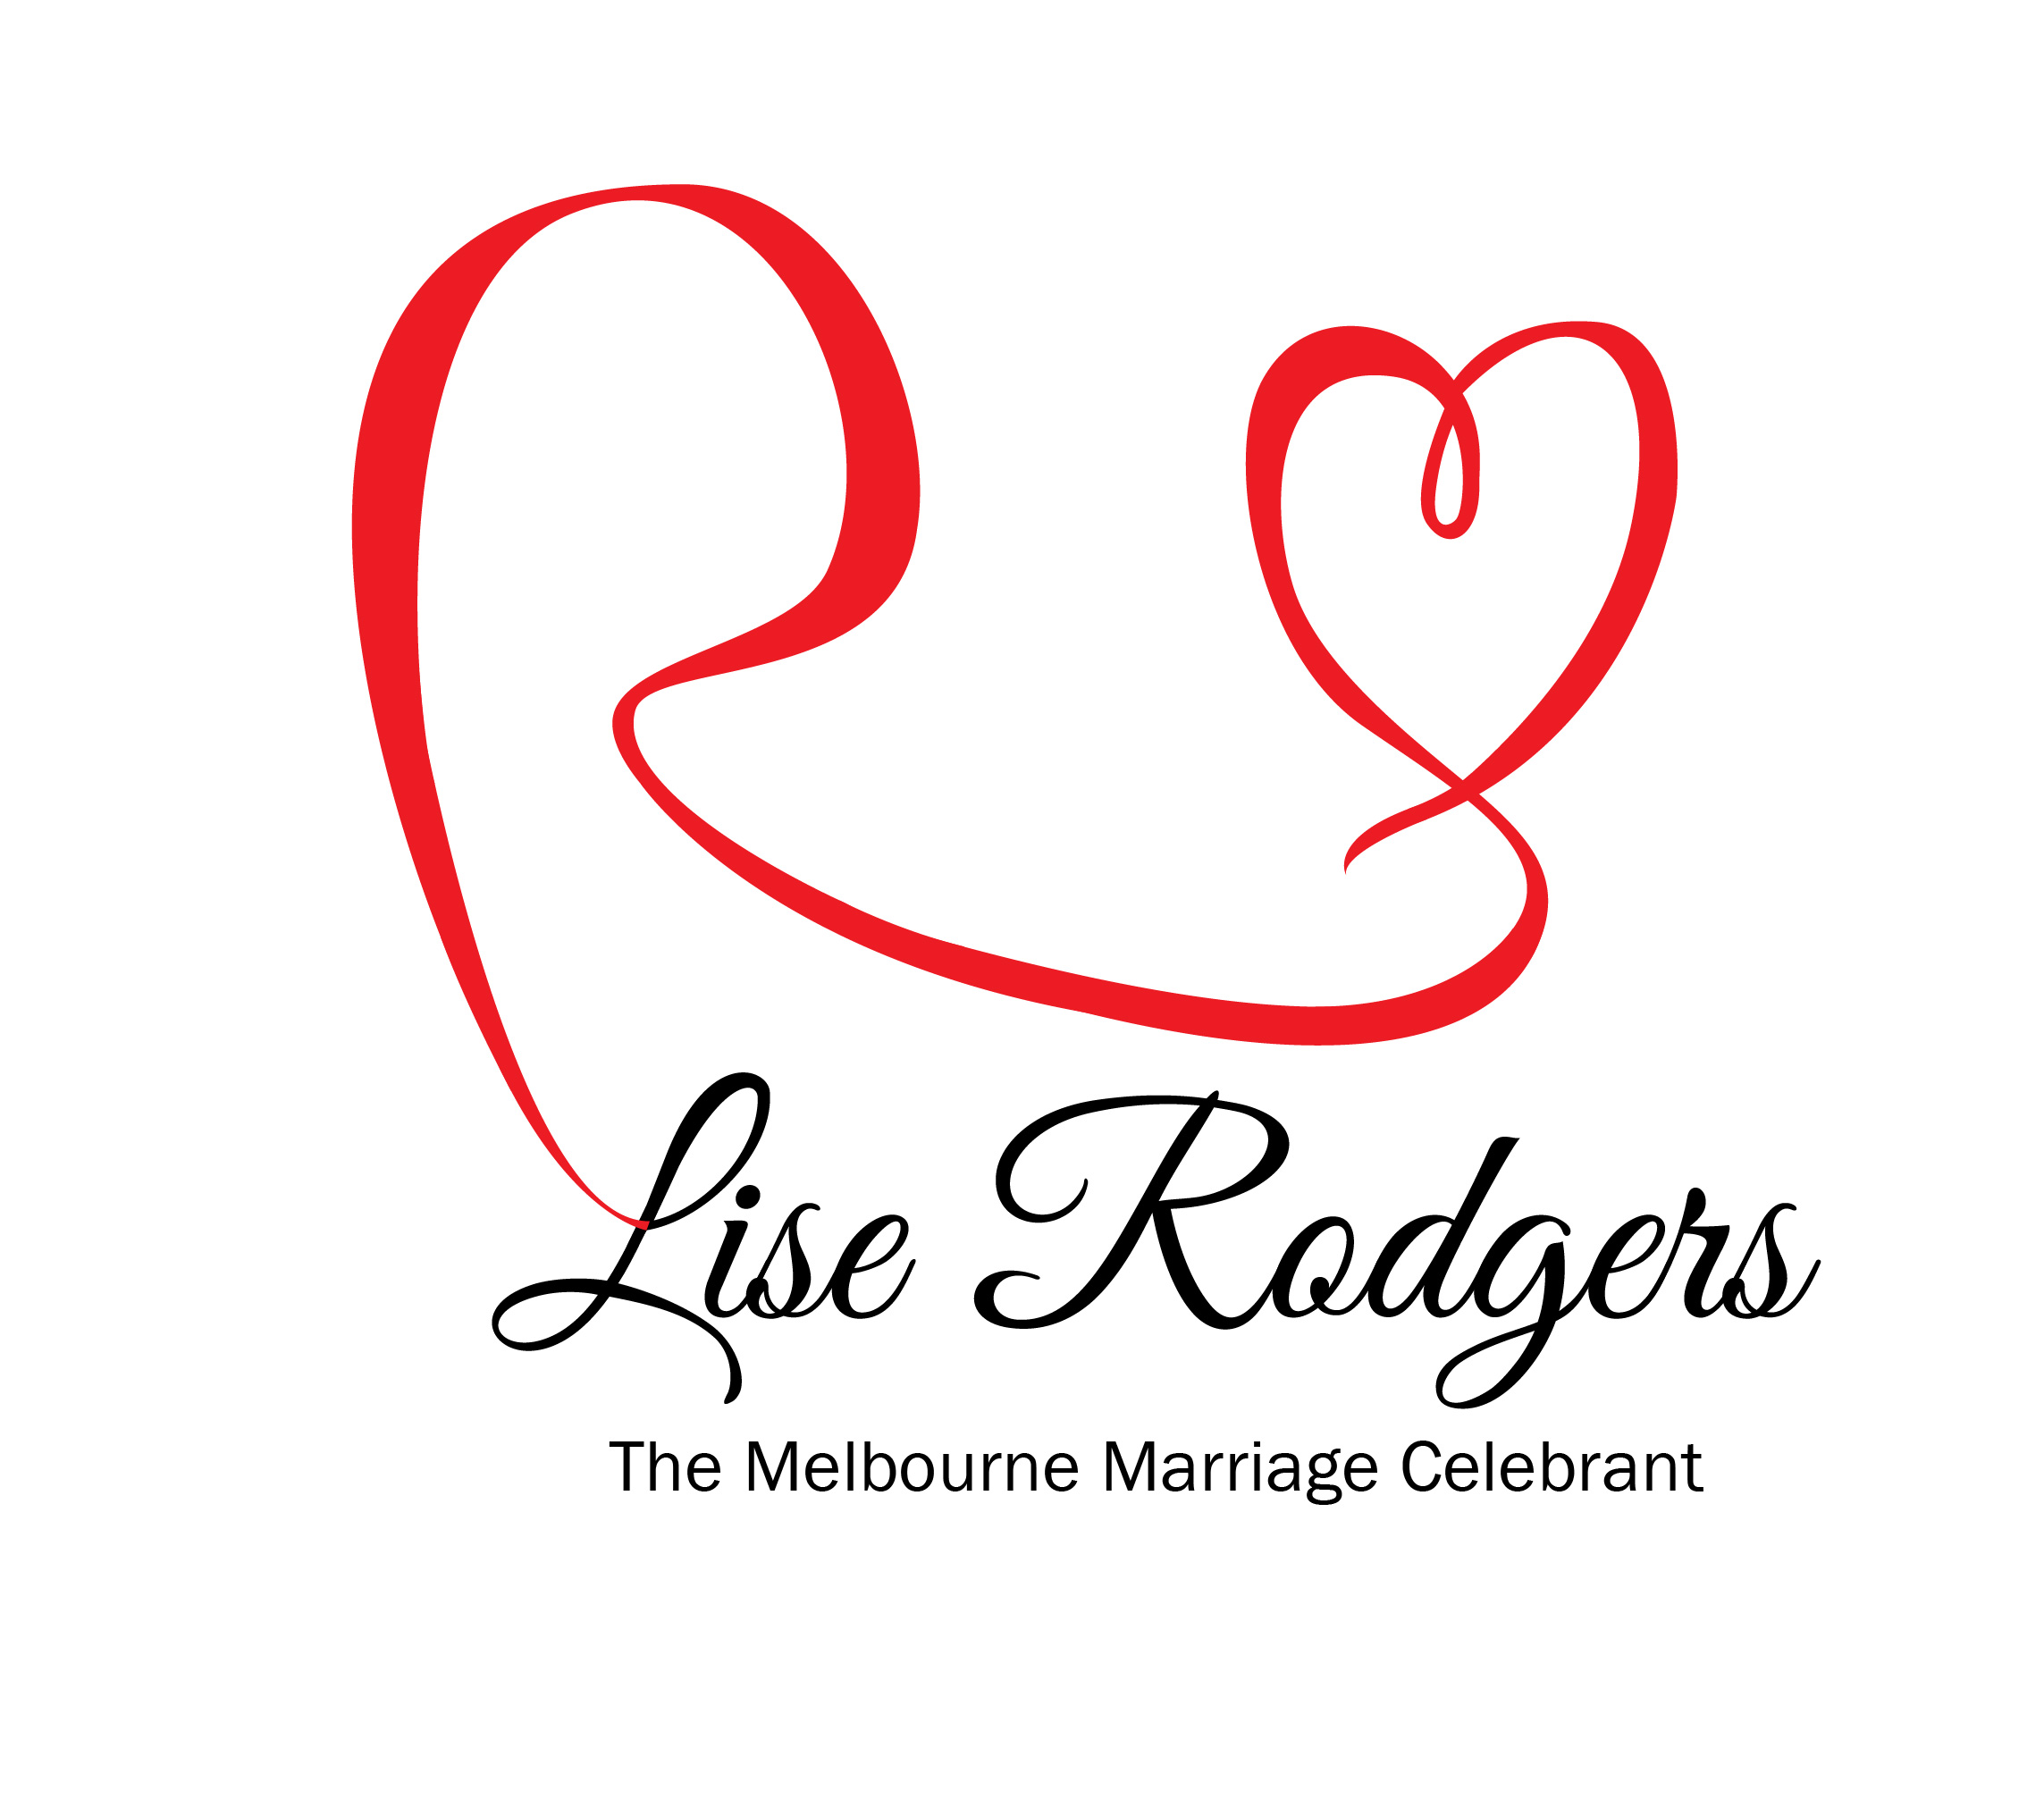 Company Logo For Marriage Celebrant Melbourne - Lise Rodgers'